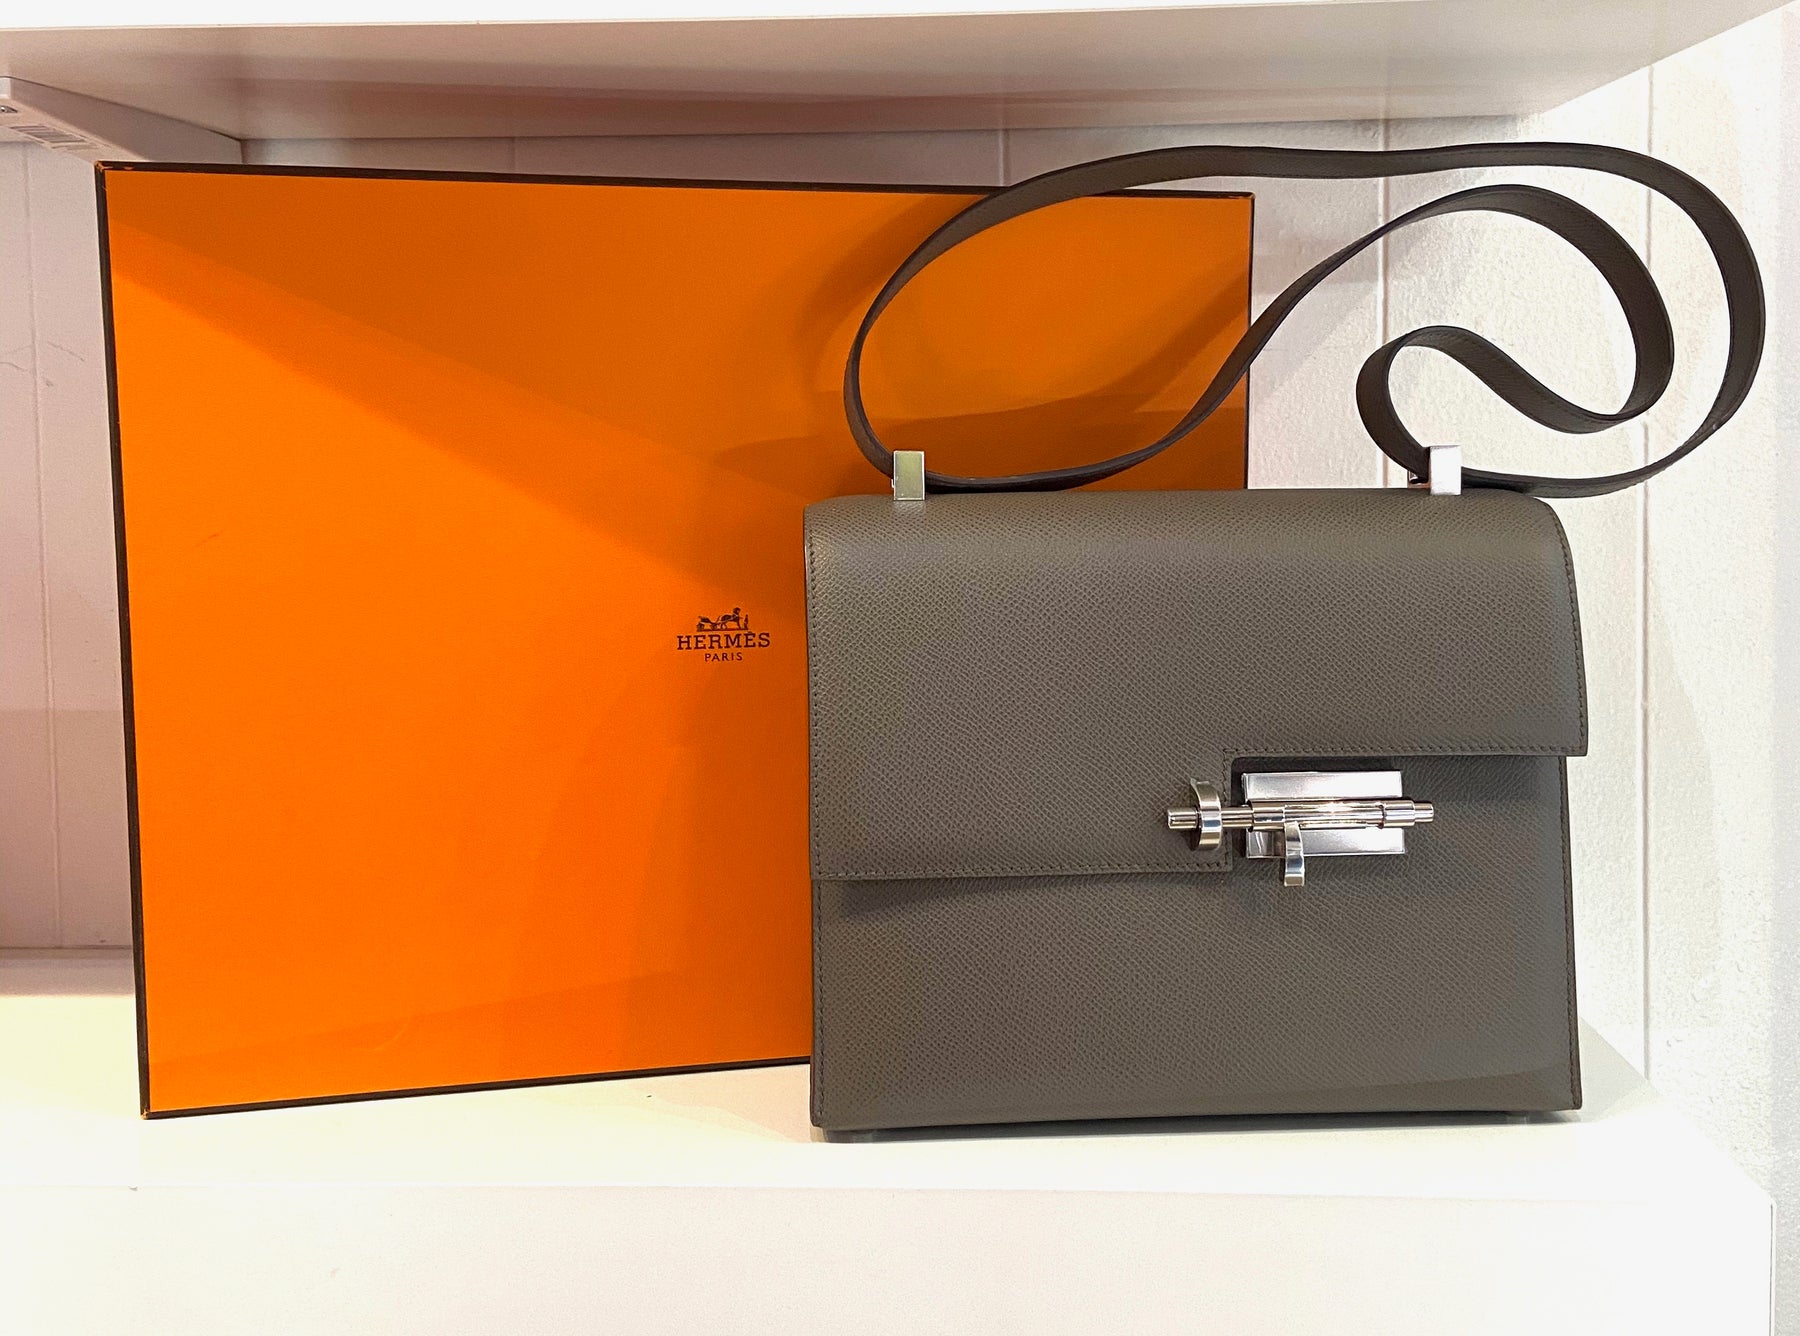 HERMÈS Verrou Clutch21 in Gold Epsom leather with Gold hardware